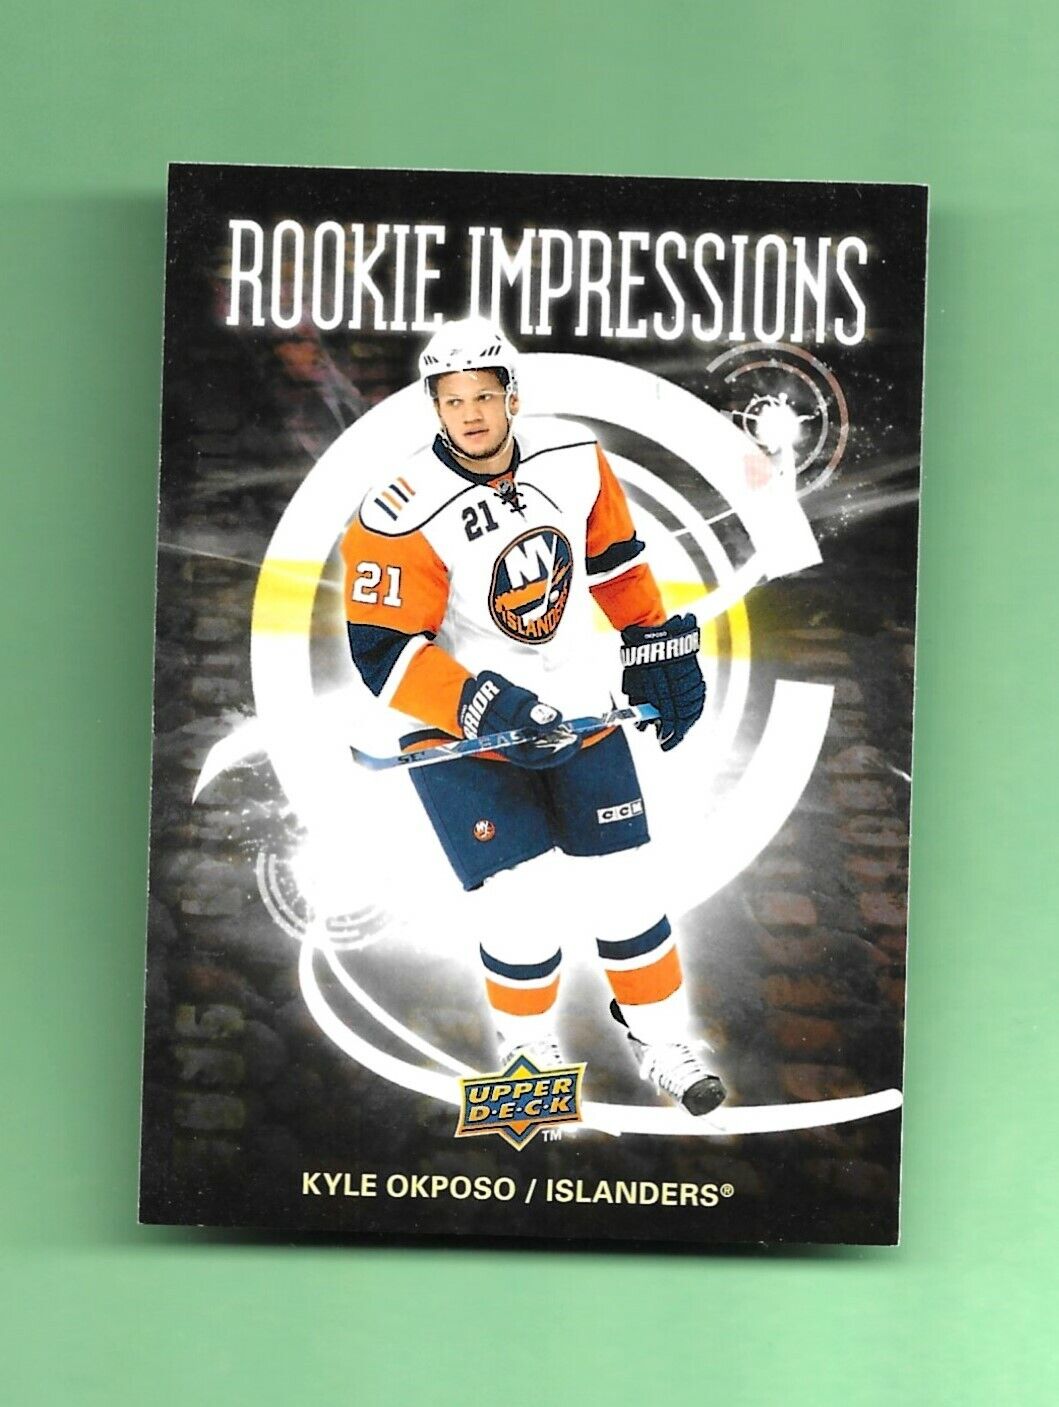 08-09 Upper Deck ROOKIE IMPRESSIONS RC Card # RI6 KYLE OKPOSO. rookie card picture